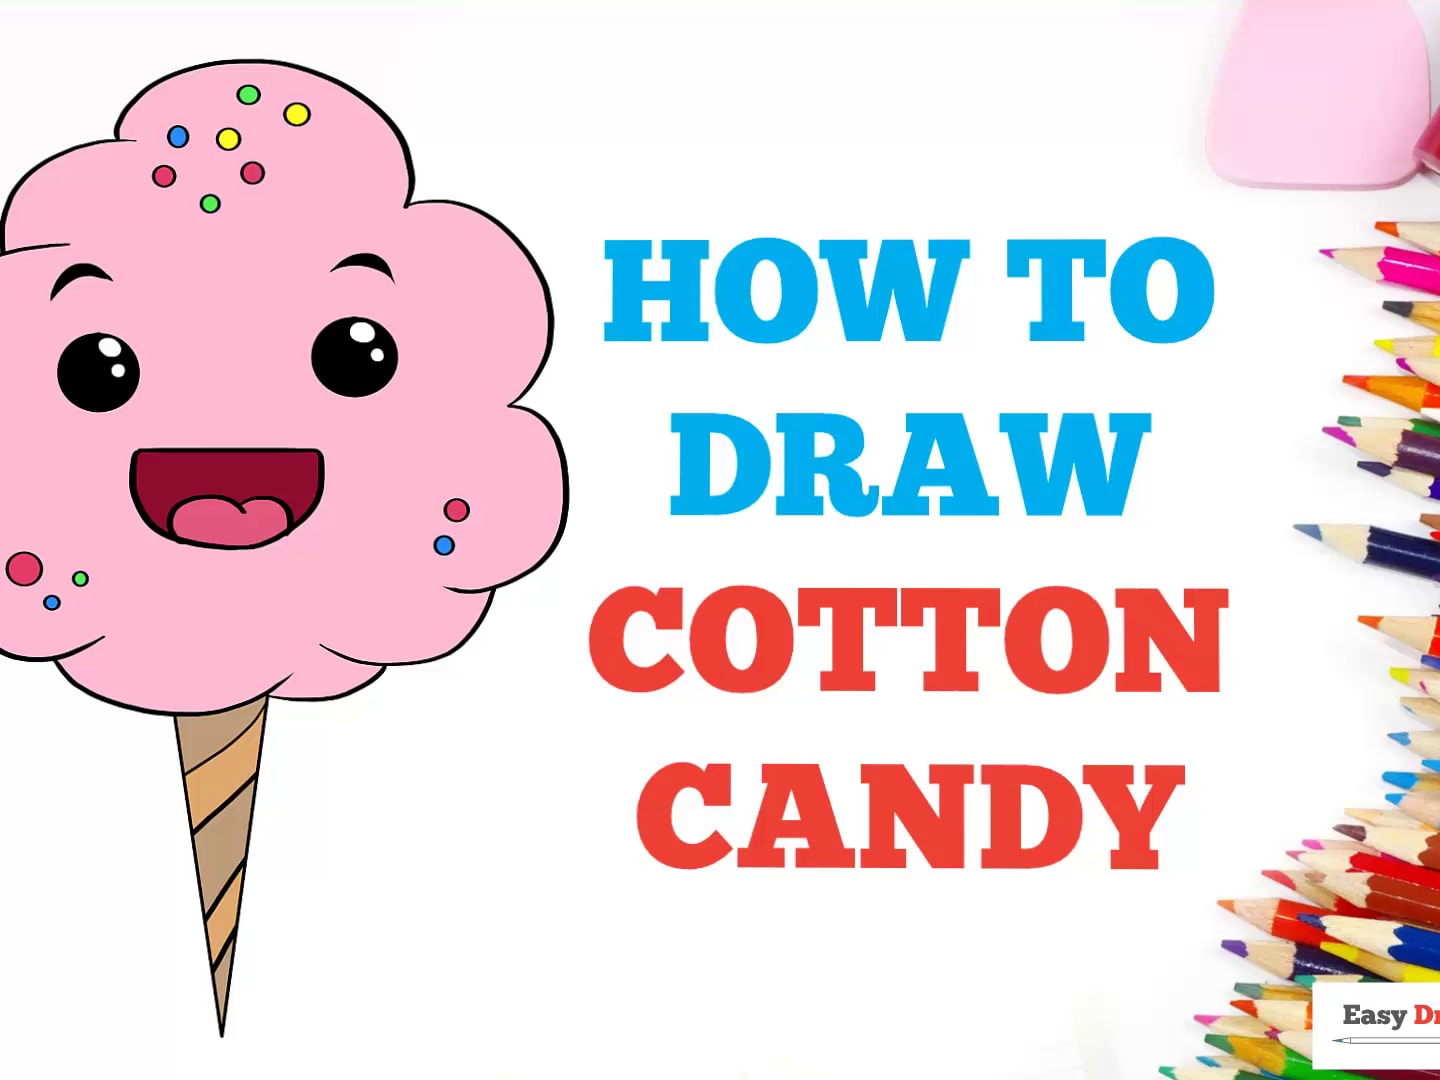 How to Draw Cotton Candy - Really Easy Drawing Tutorial